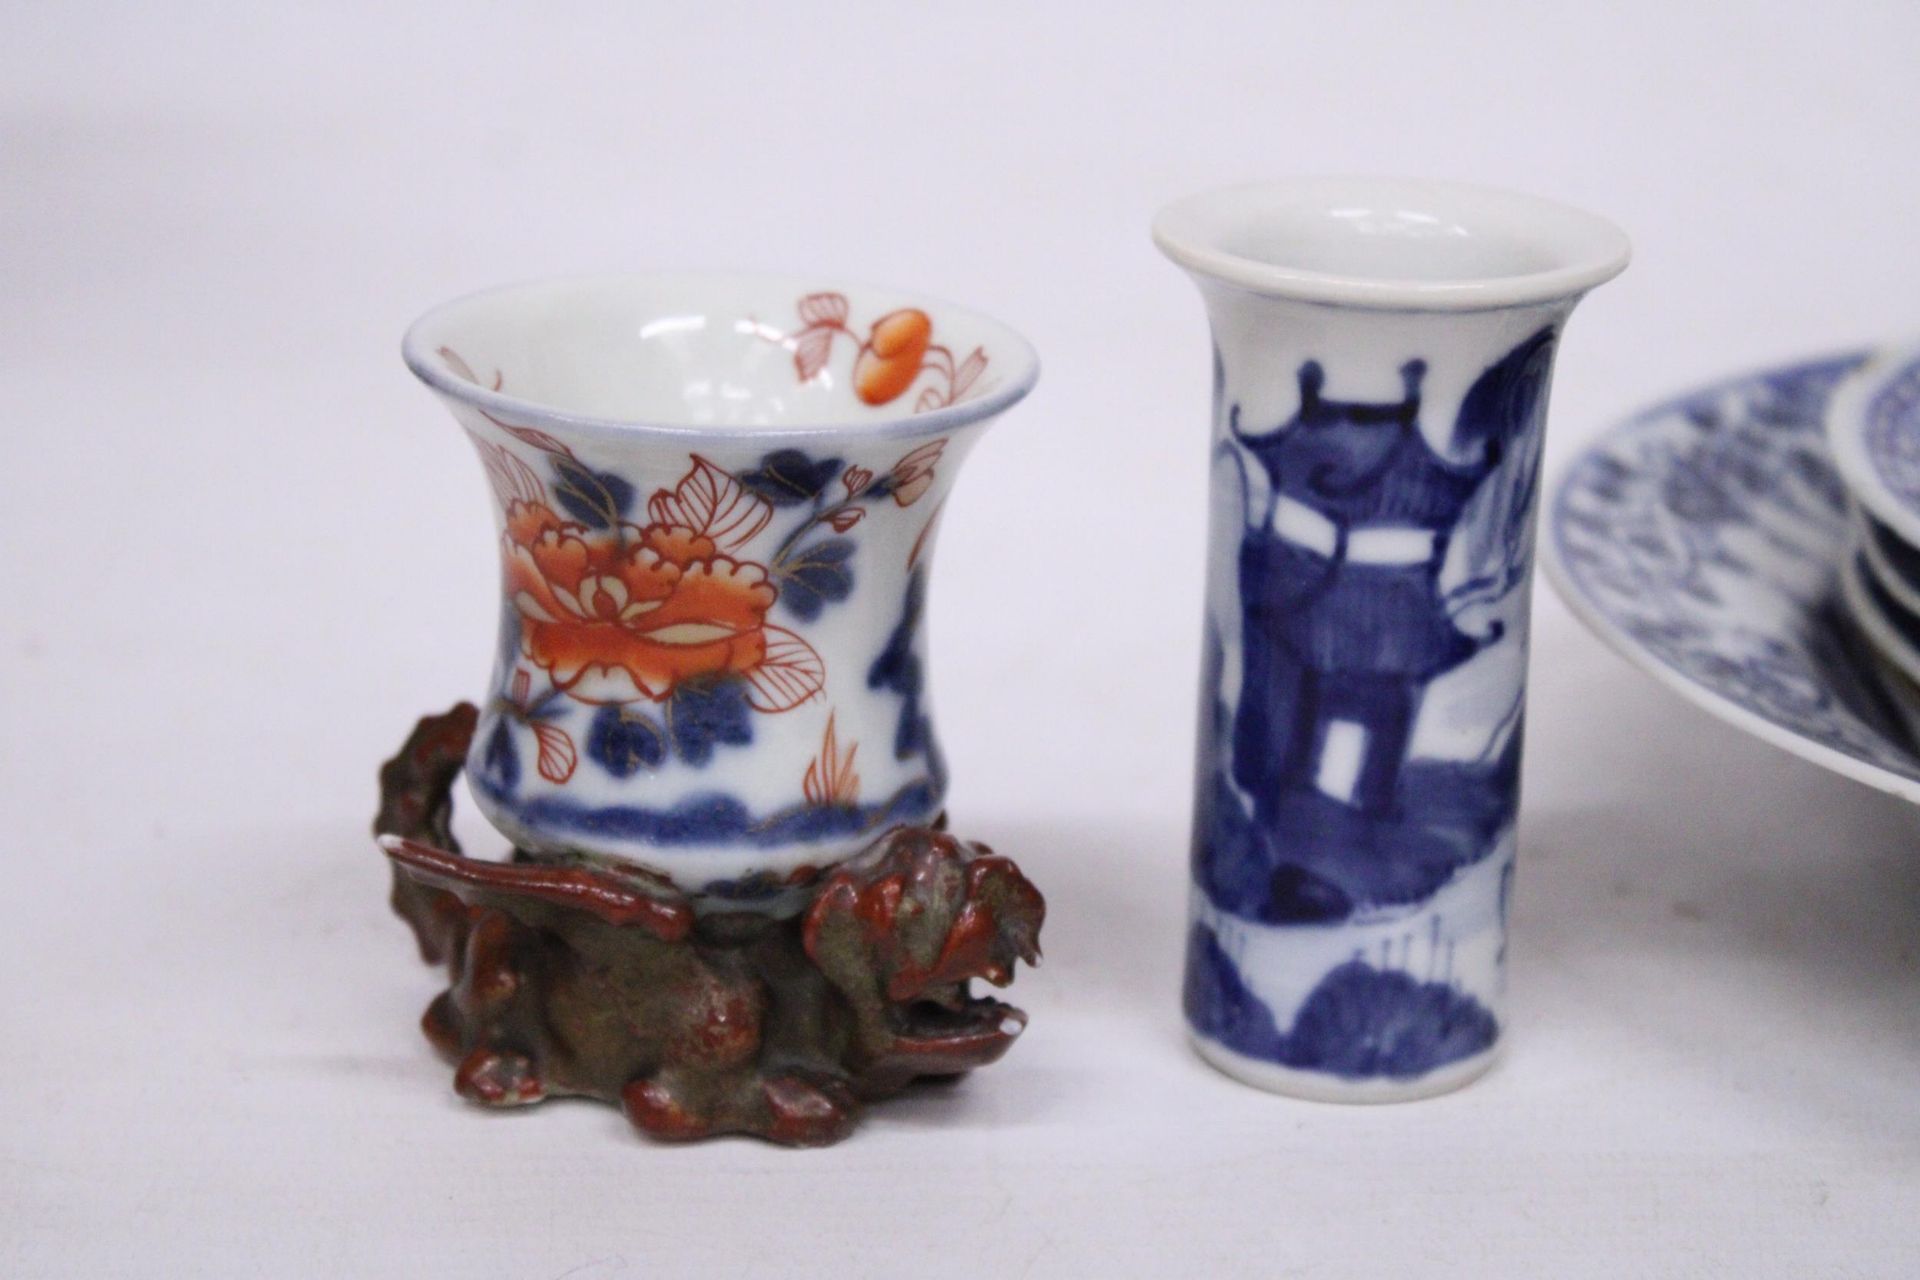 A COLLECTION OF CHINESE BLUE AND WHITE PORCELAIN TO INCLUDE A SMALL VASE, BOWL, PLATES, TEACUP ON - Image 2 of 5